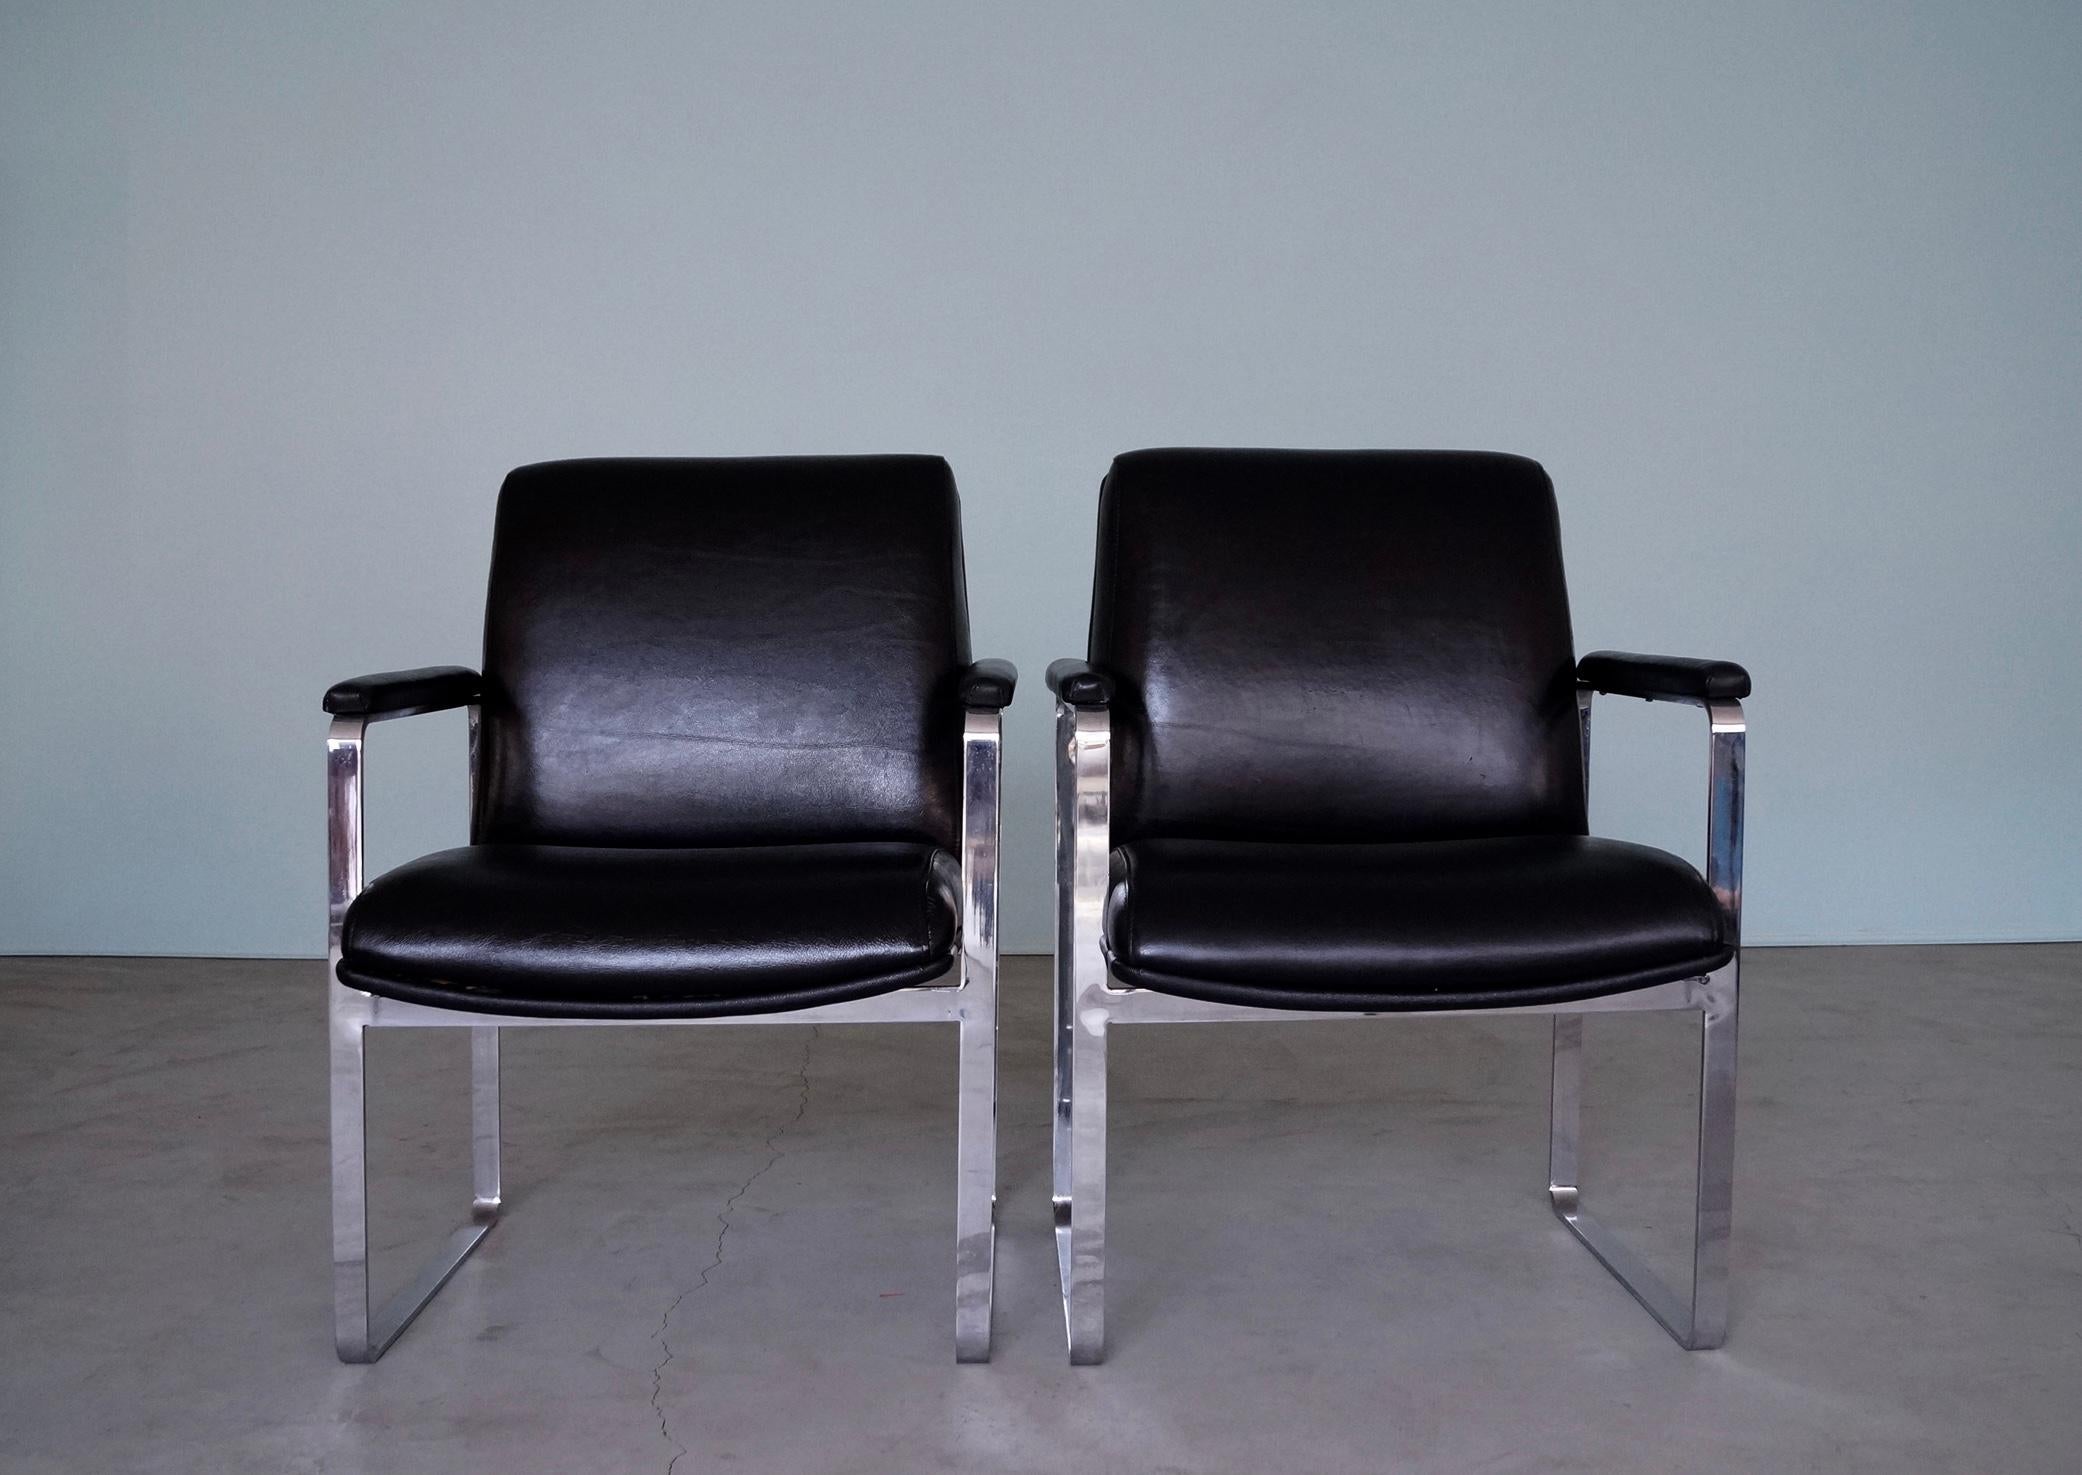 1960's Mid-Century Modern Flat Bar Chrome & Black Leather Armchairs - a Pair In Excellent Condition For Sale In Burbank, CA